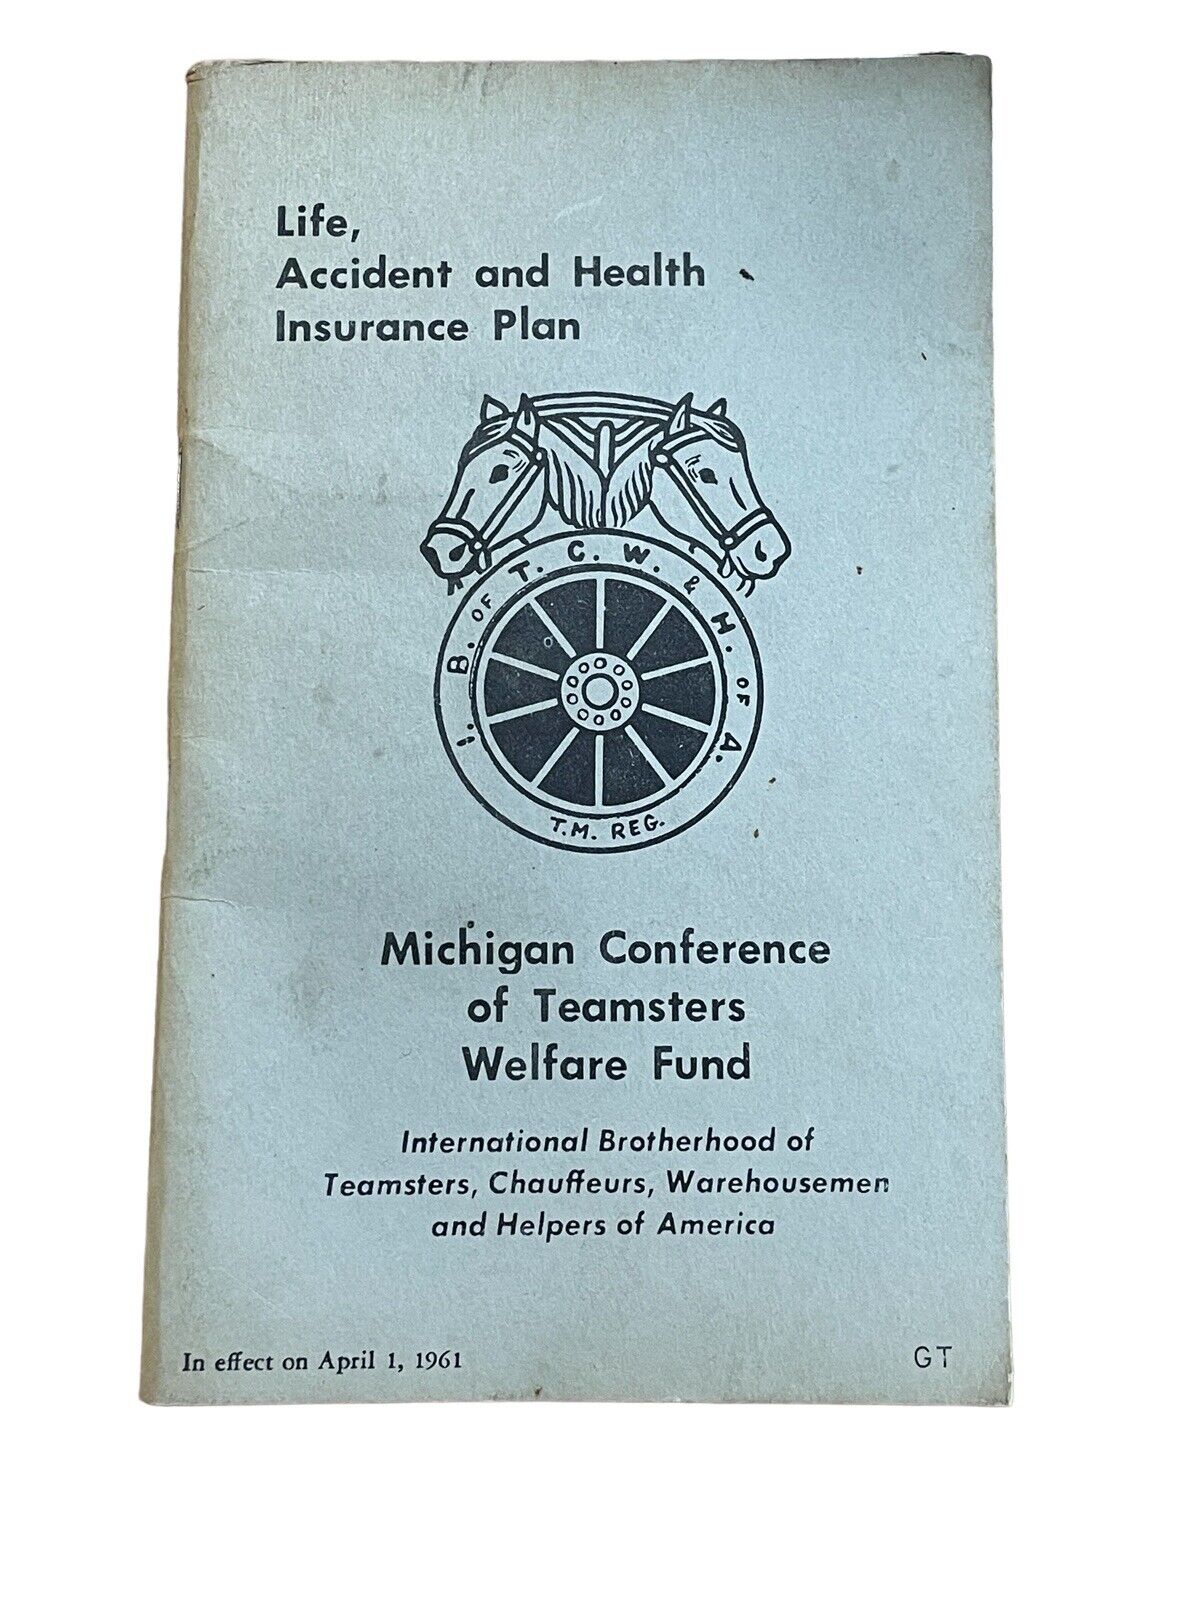 Life, accident and health insurance plan Michigan conferences of Teamsters 1961